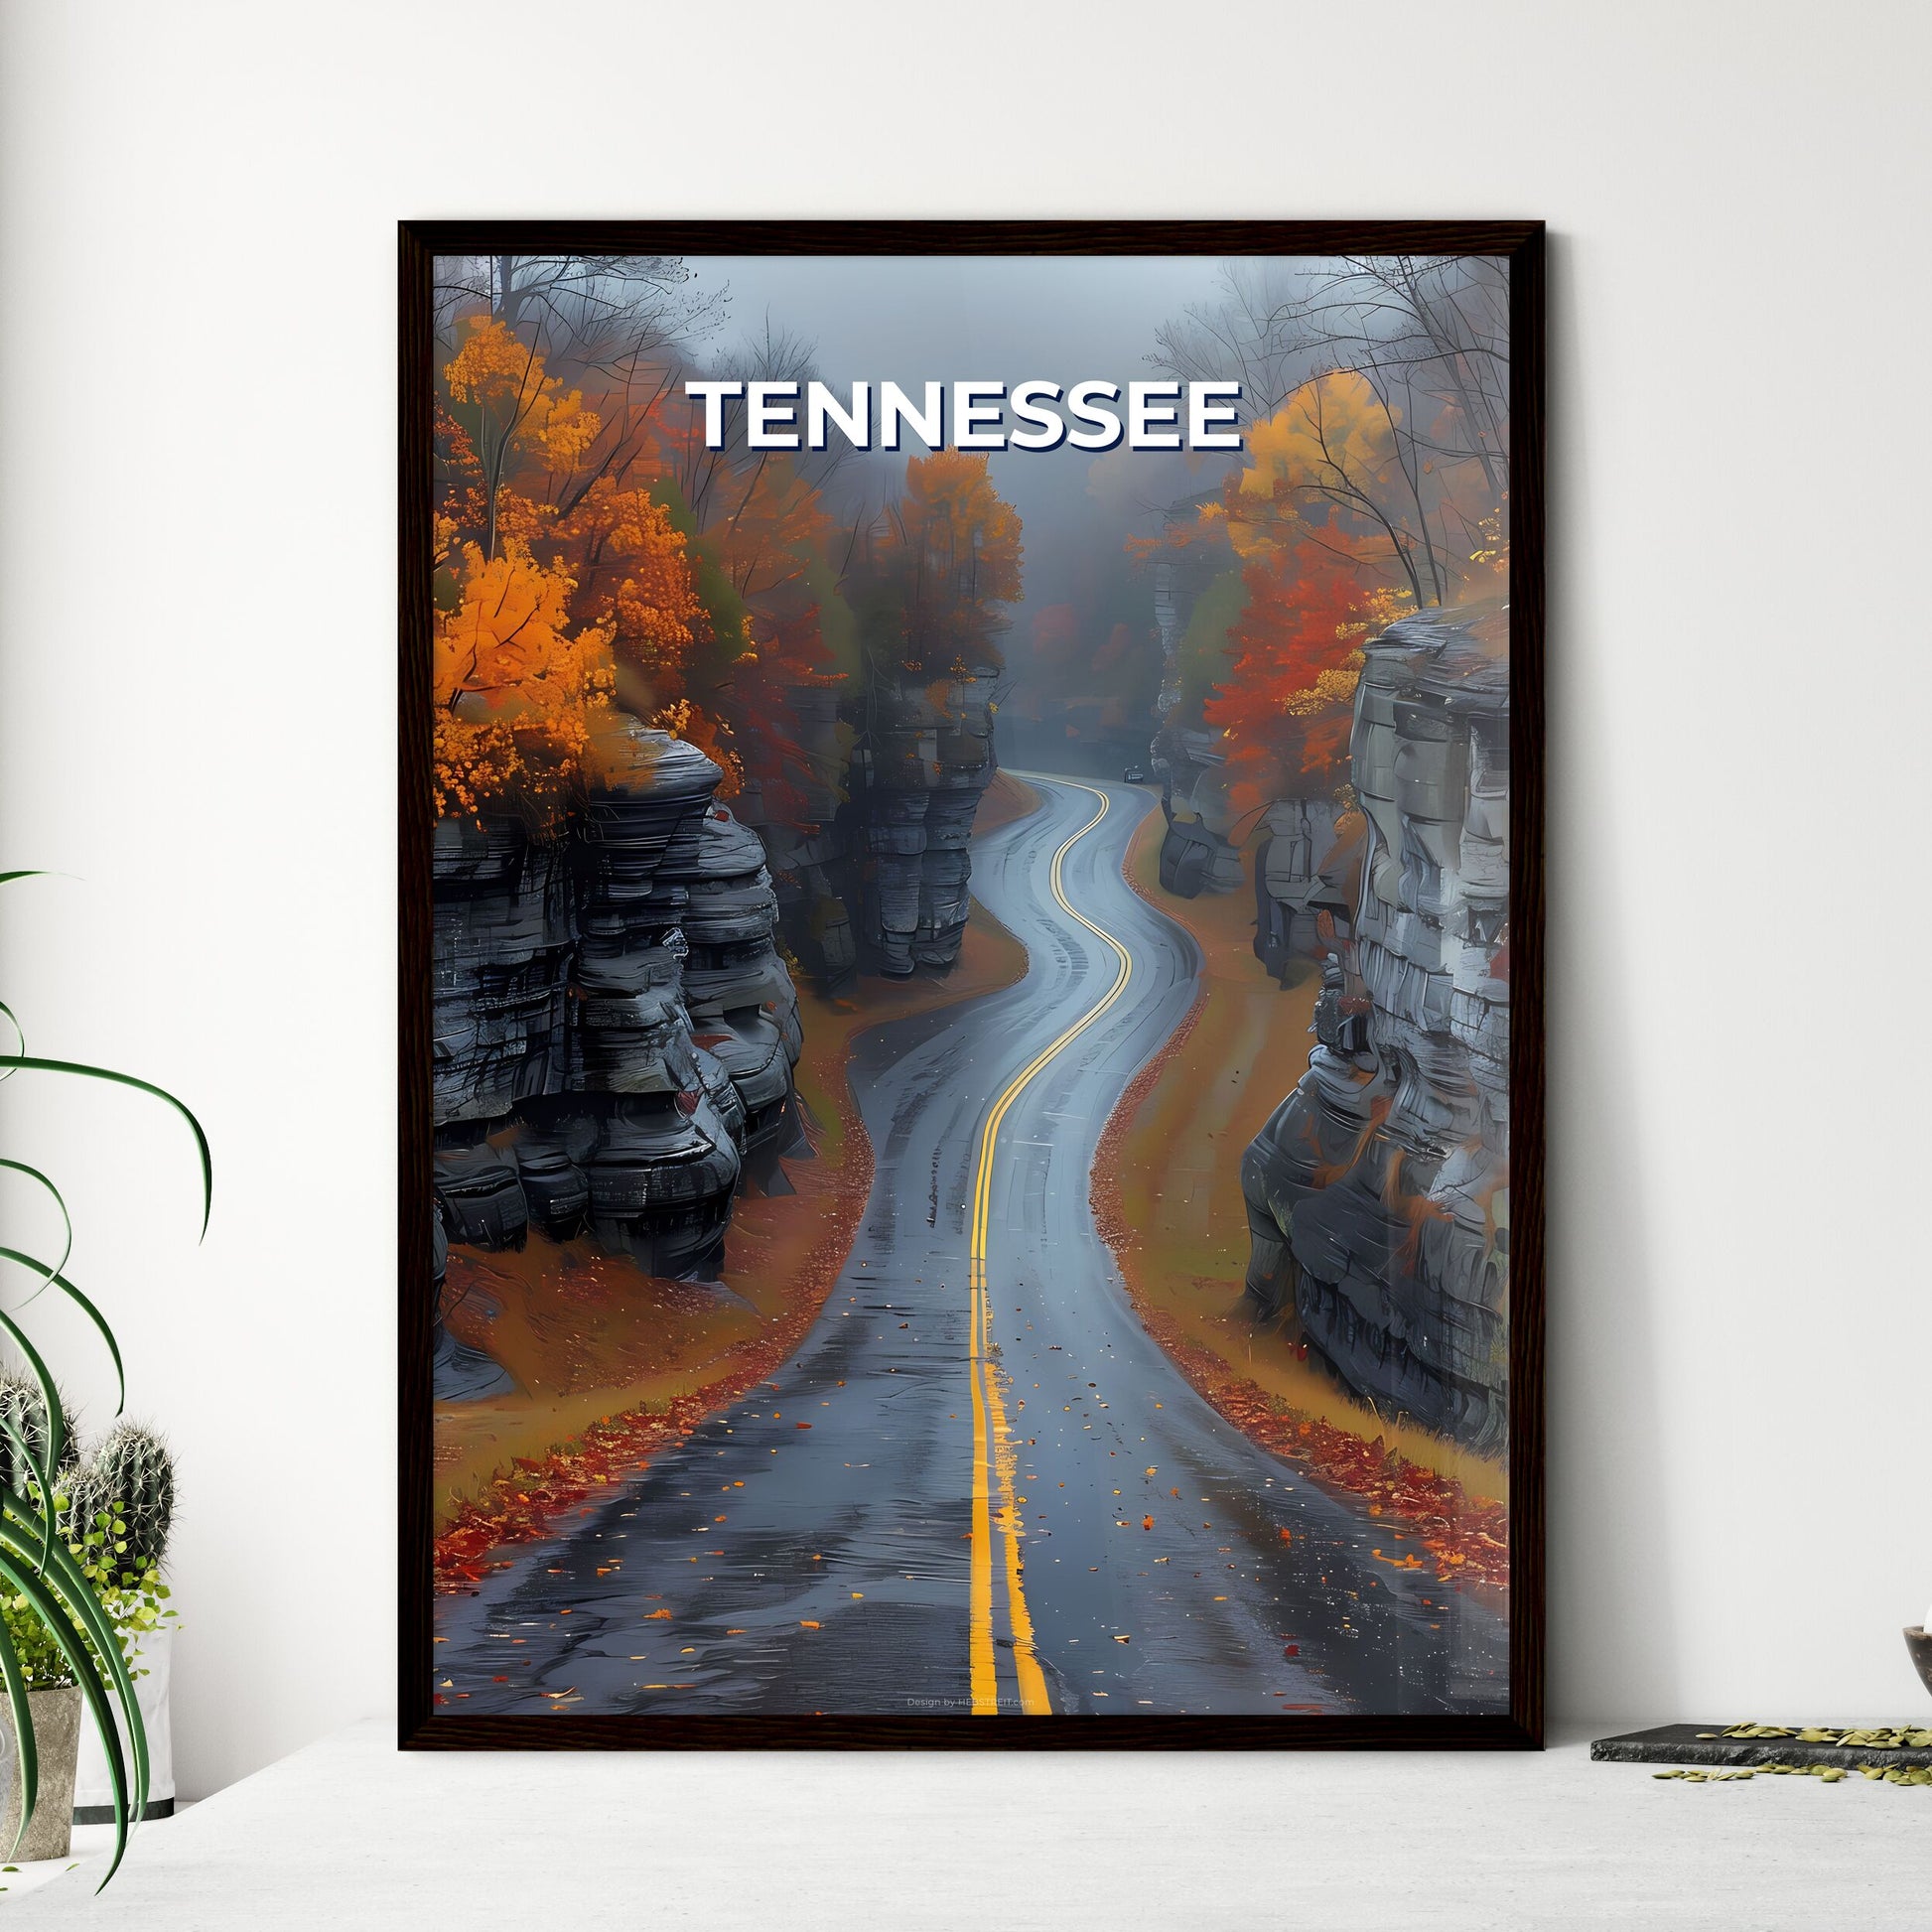 Vibrant Painted Road Scene Through Captivating Tennessee Canyon Landscape